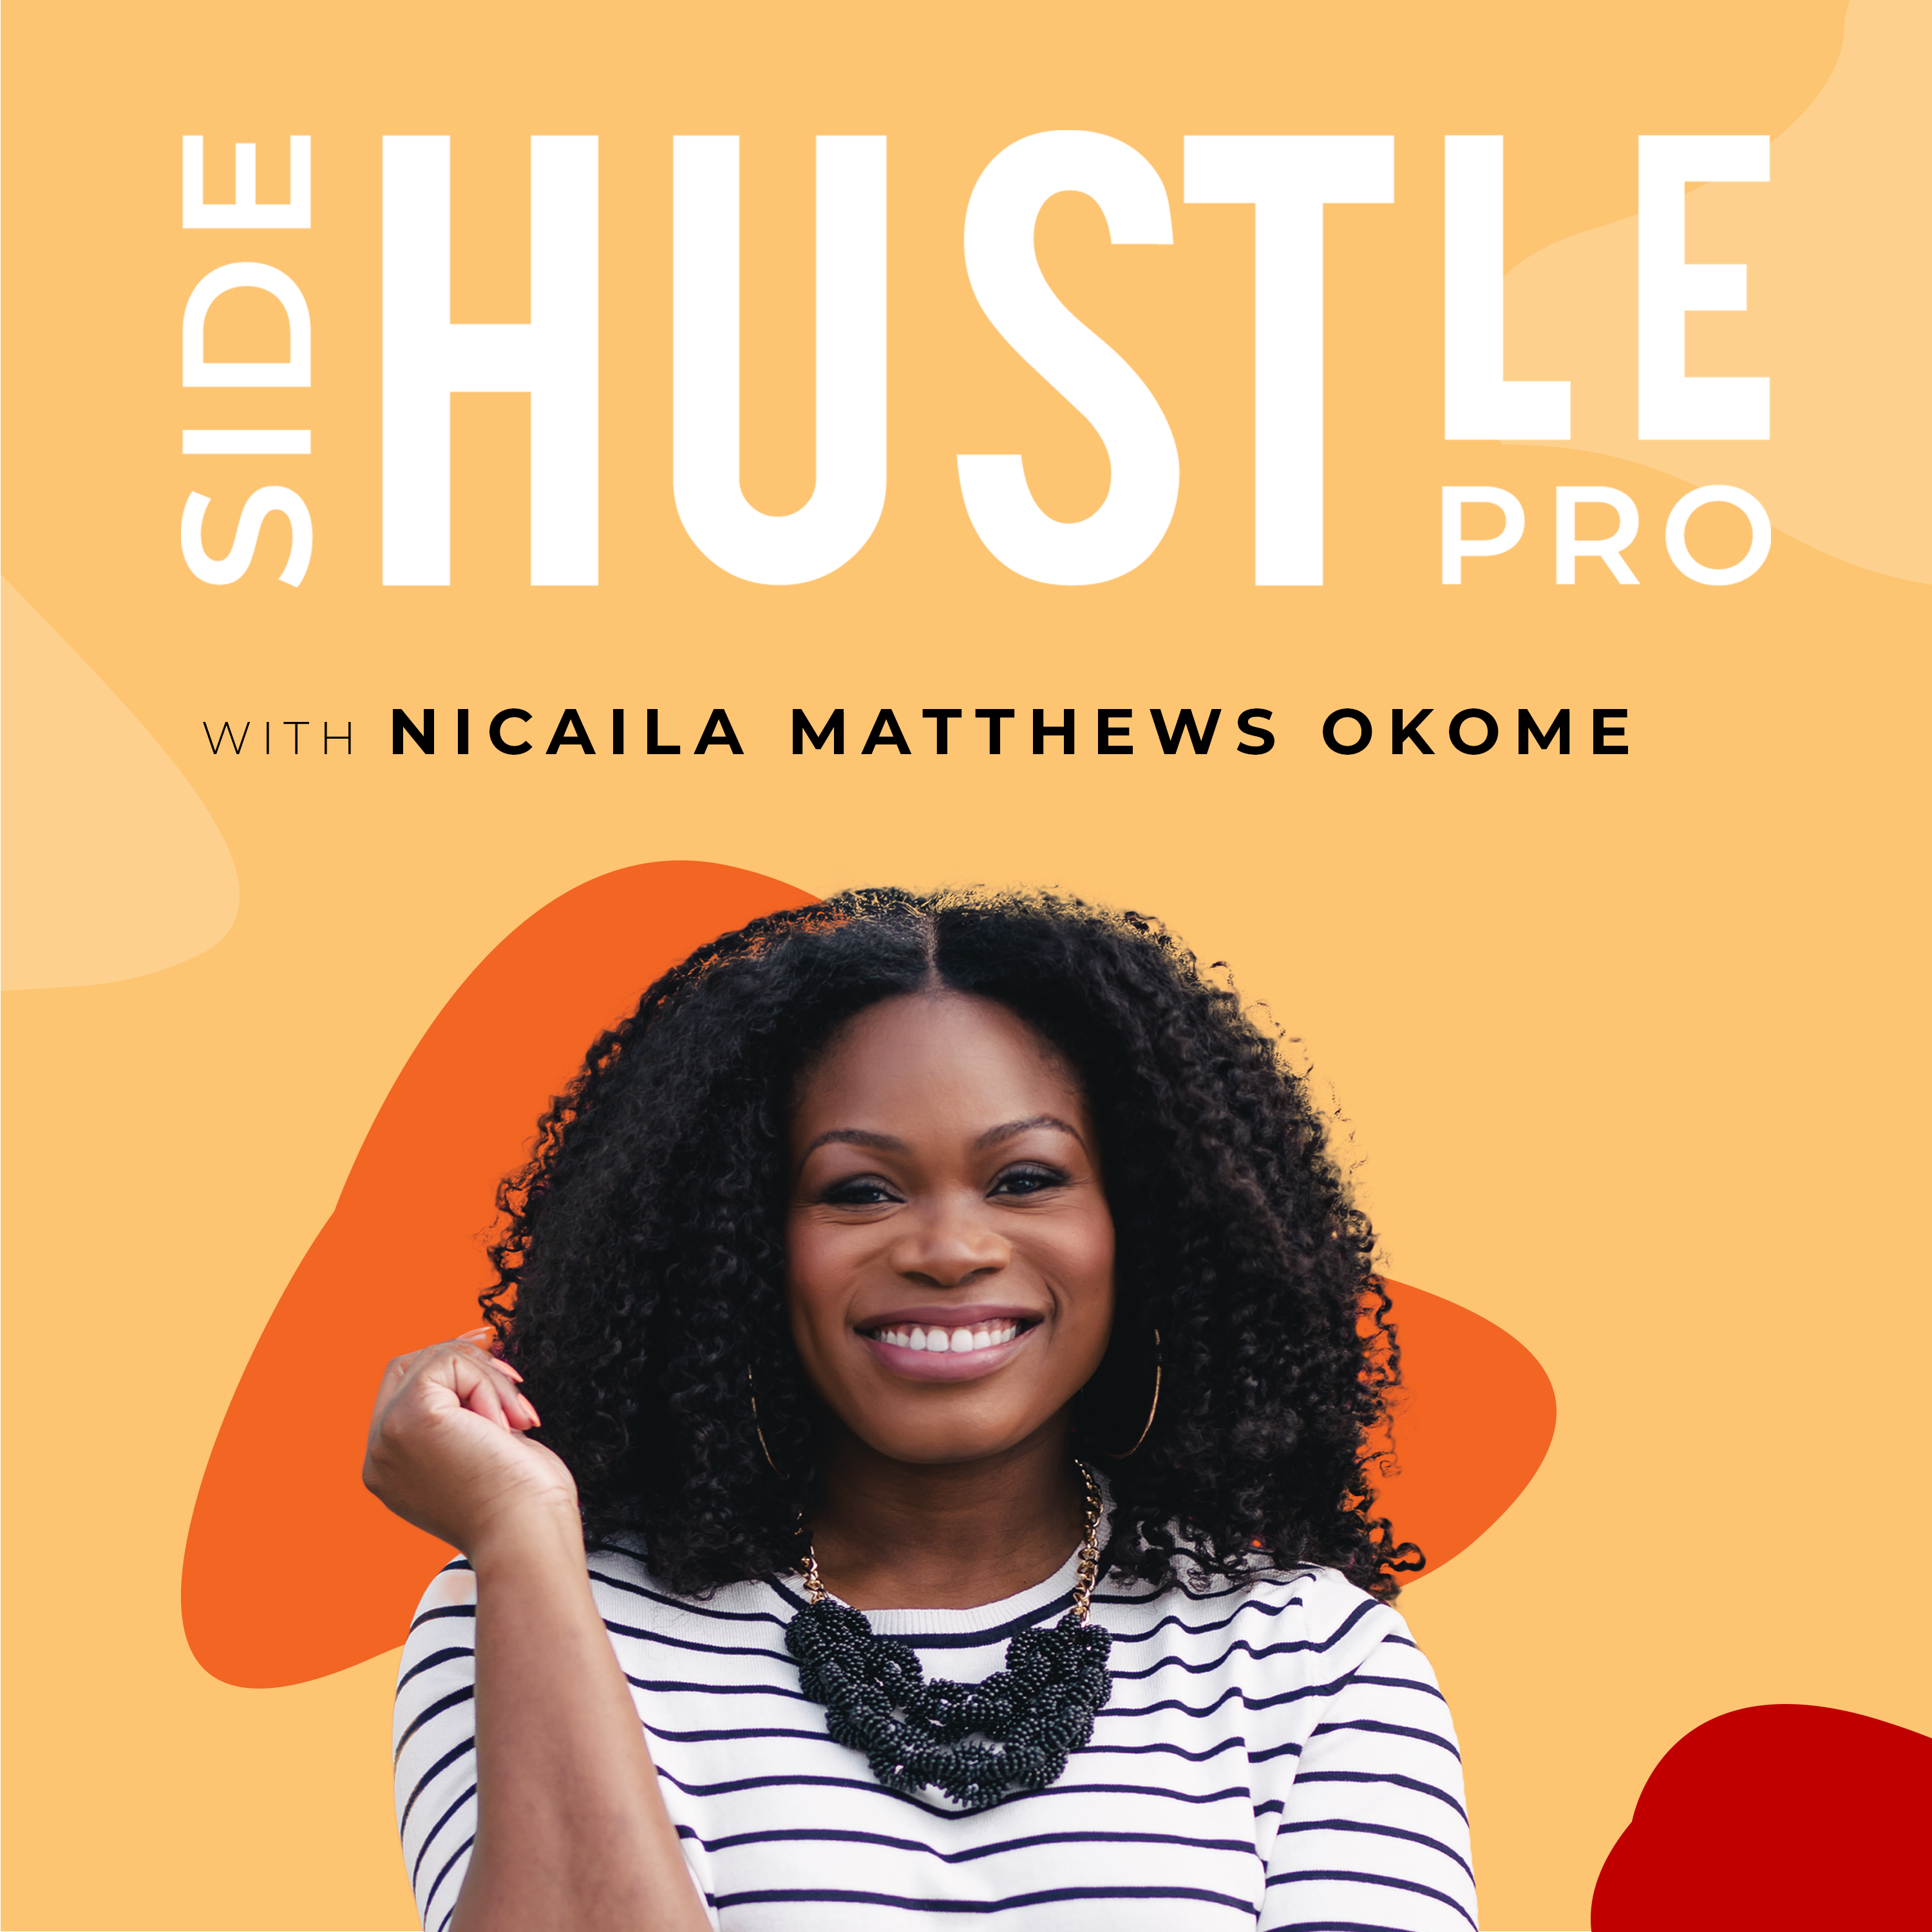 267: No More Excuses, It’s Time to Act on Your Side Hustle Idea REWIND